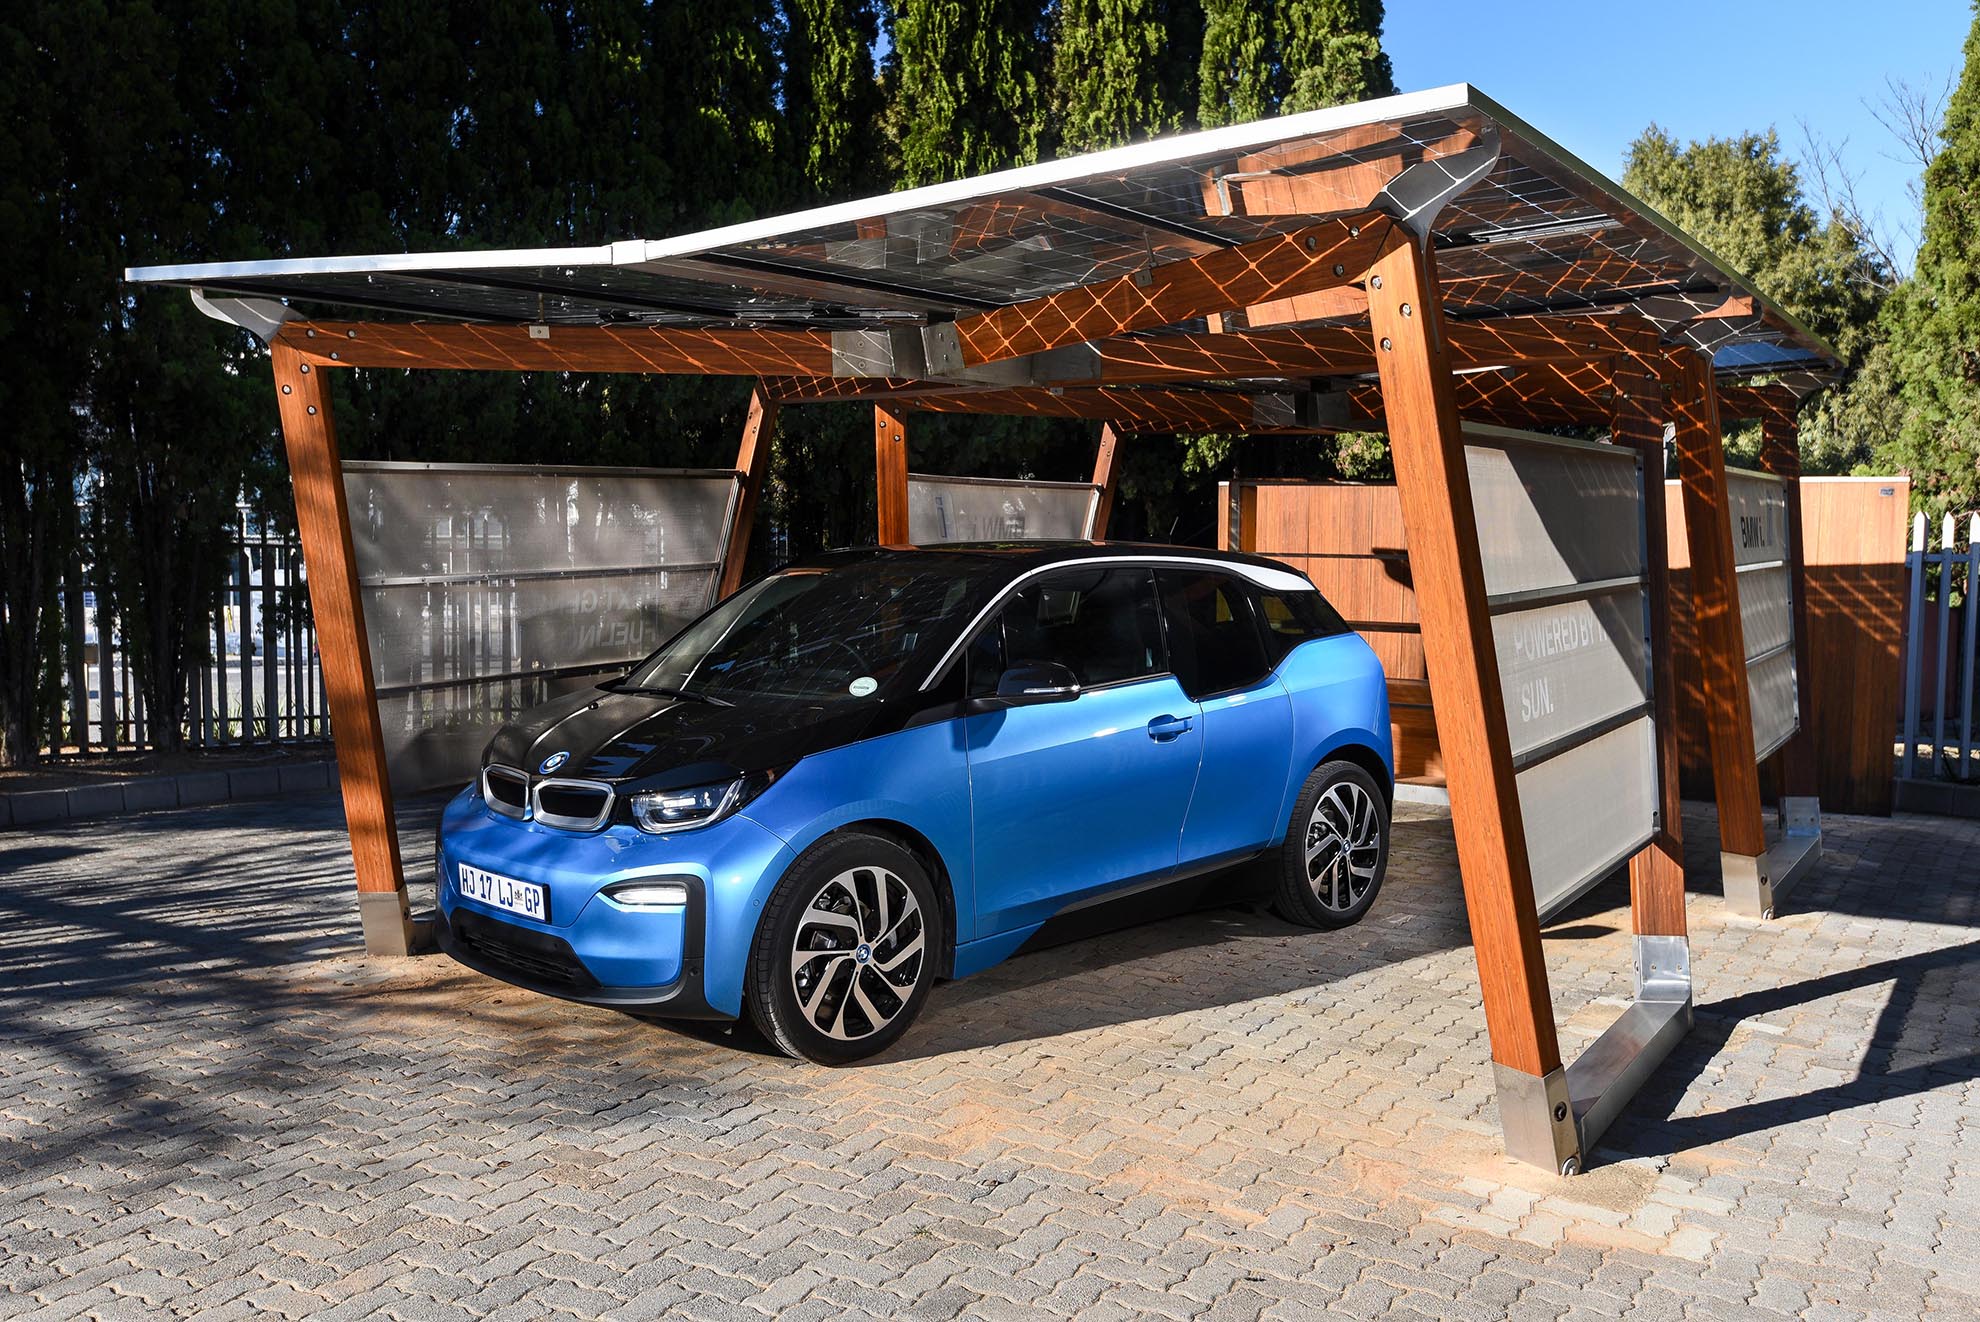 The new BMW i3 available in South Africa